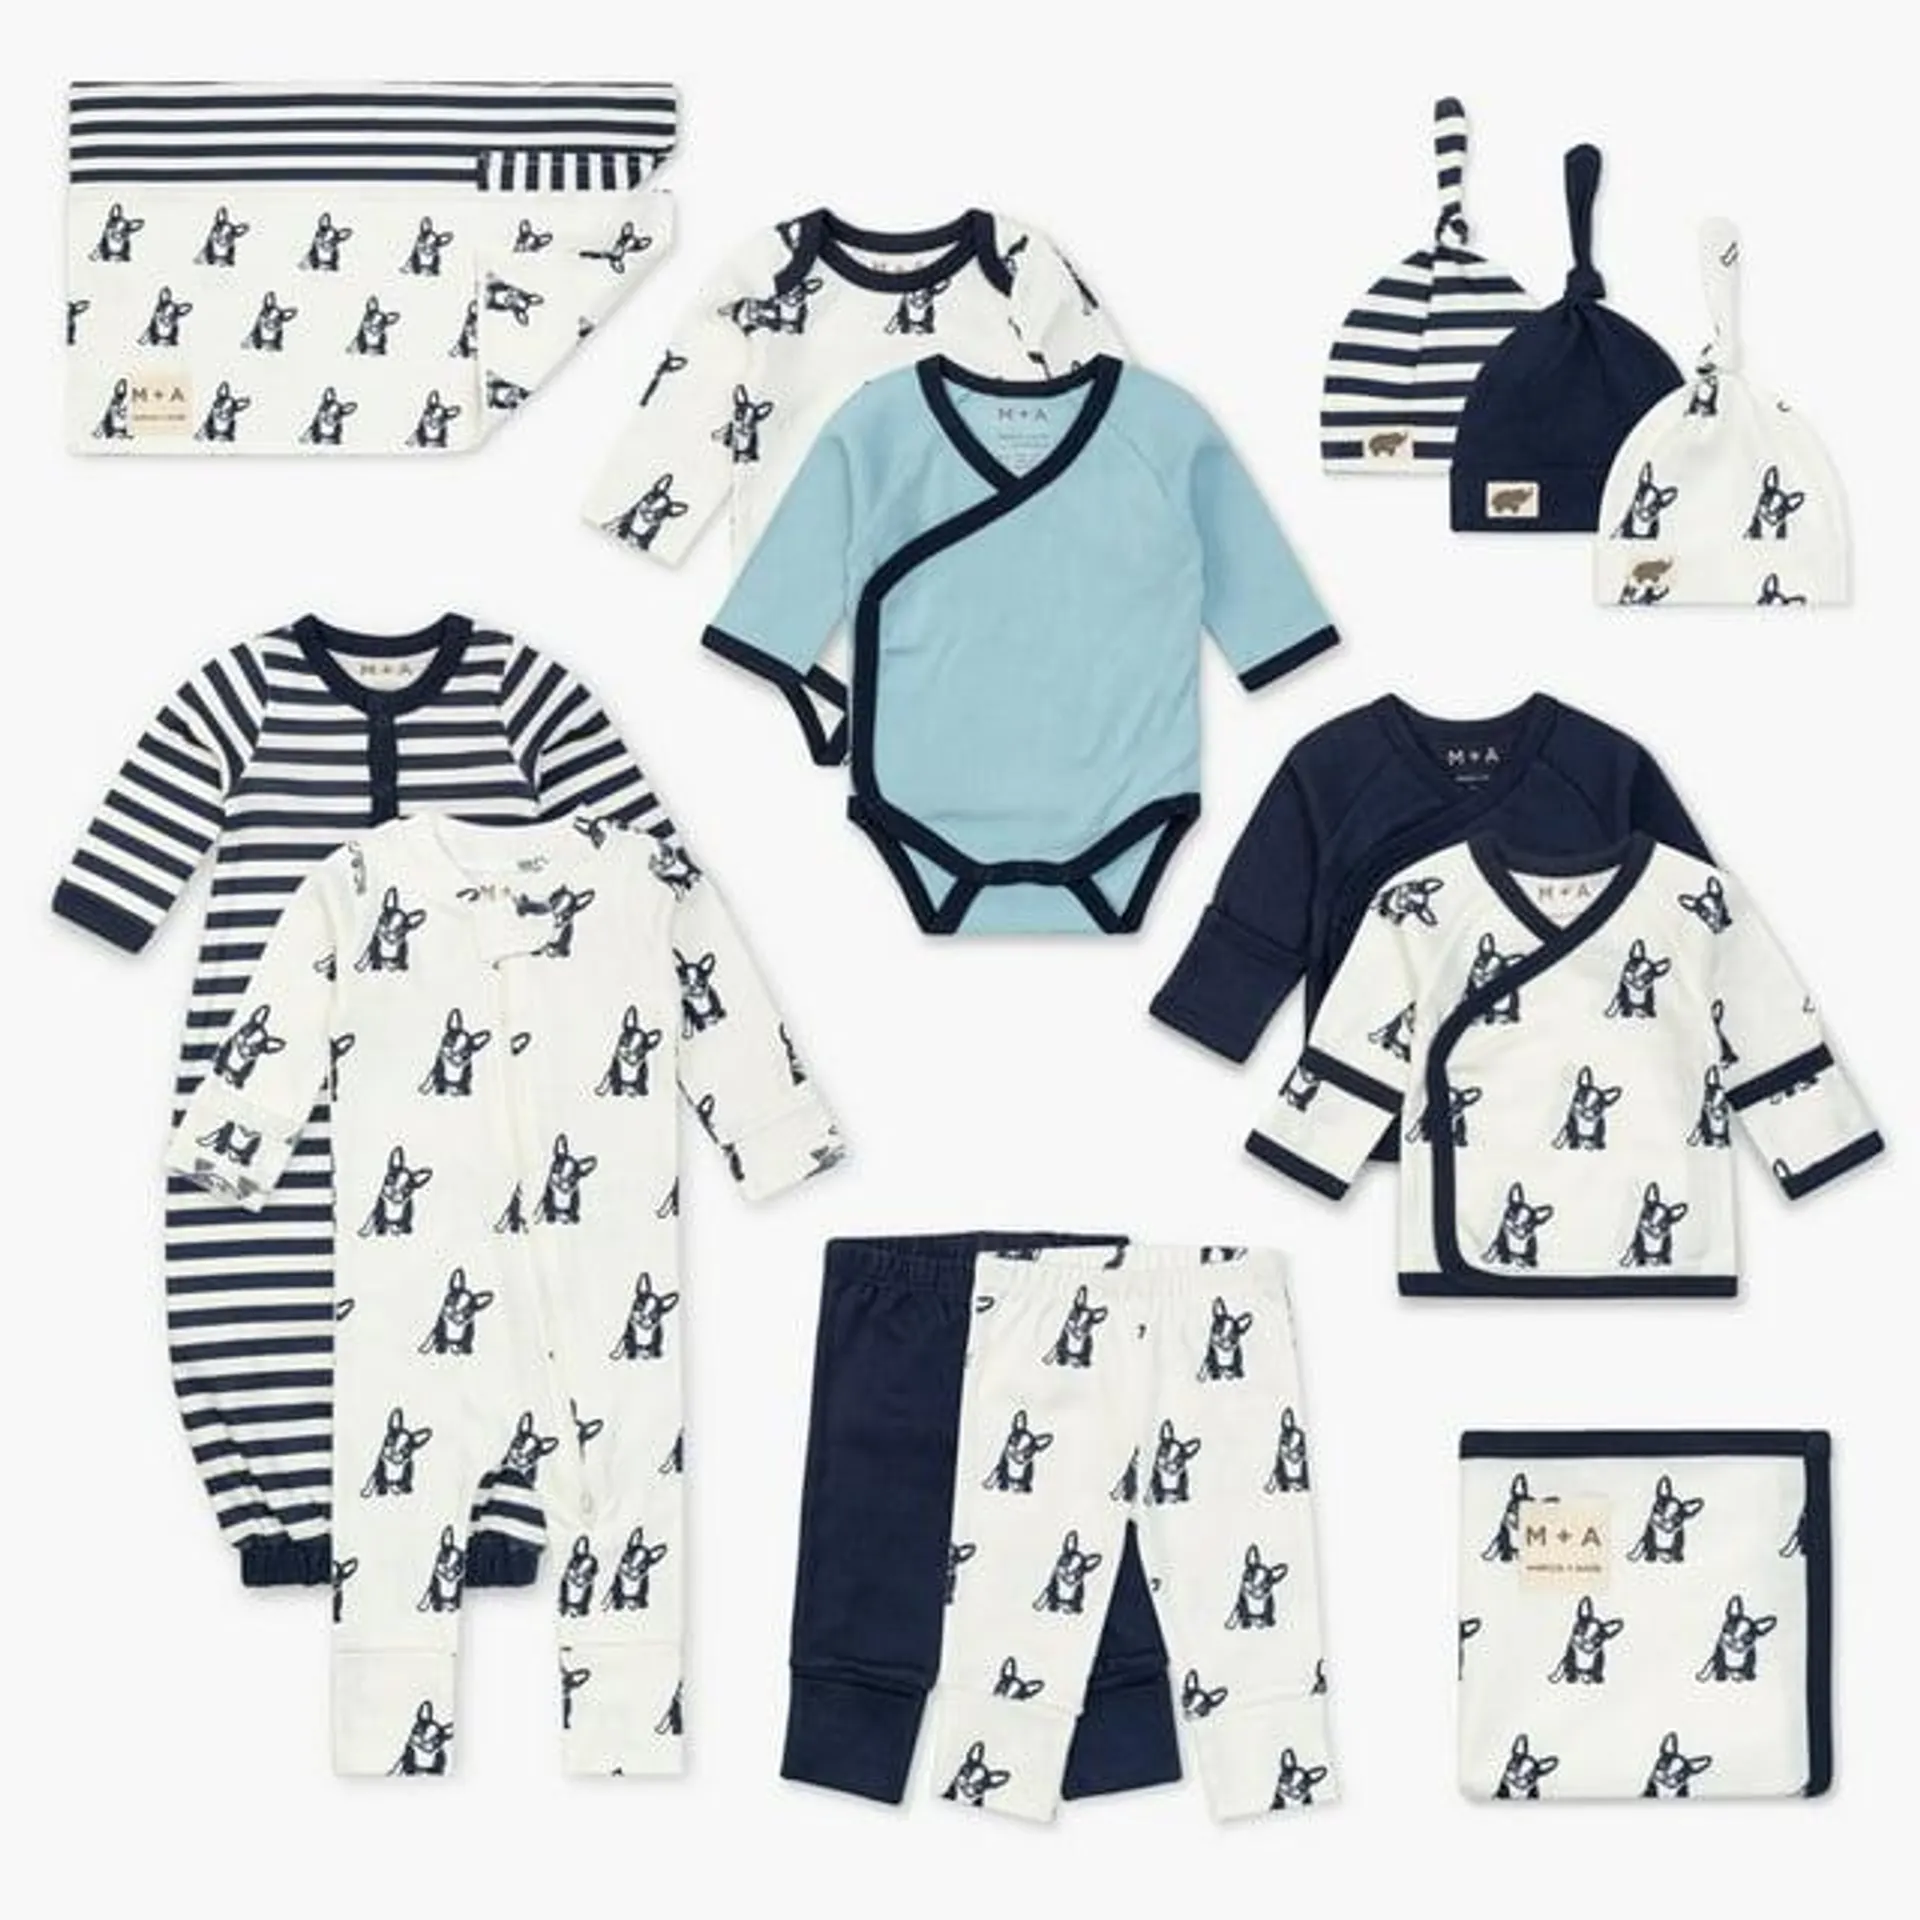 M+A by Monica + Andy Baby Shower Gift Set, 14-Piece, Preemie-3 Months